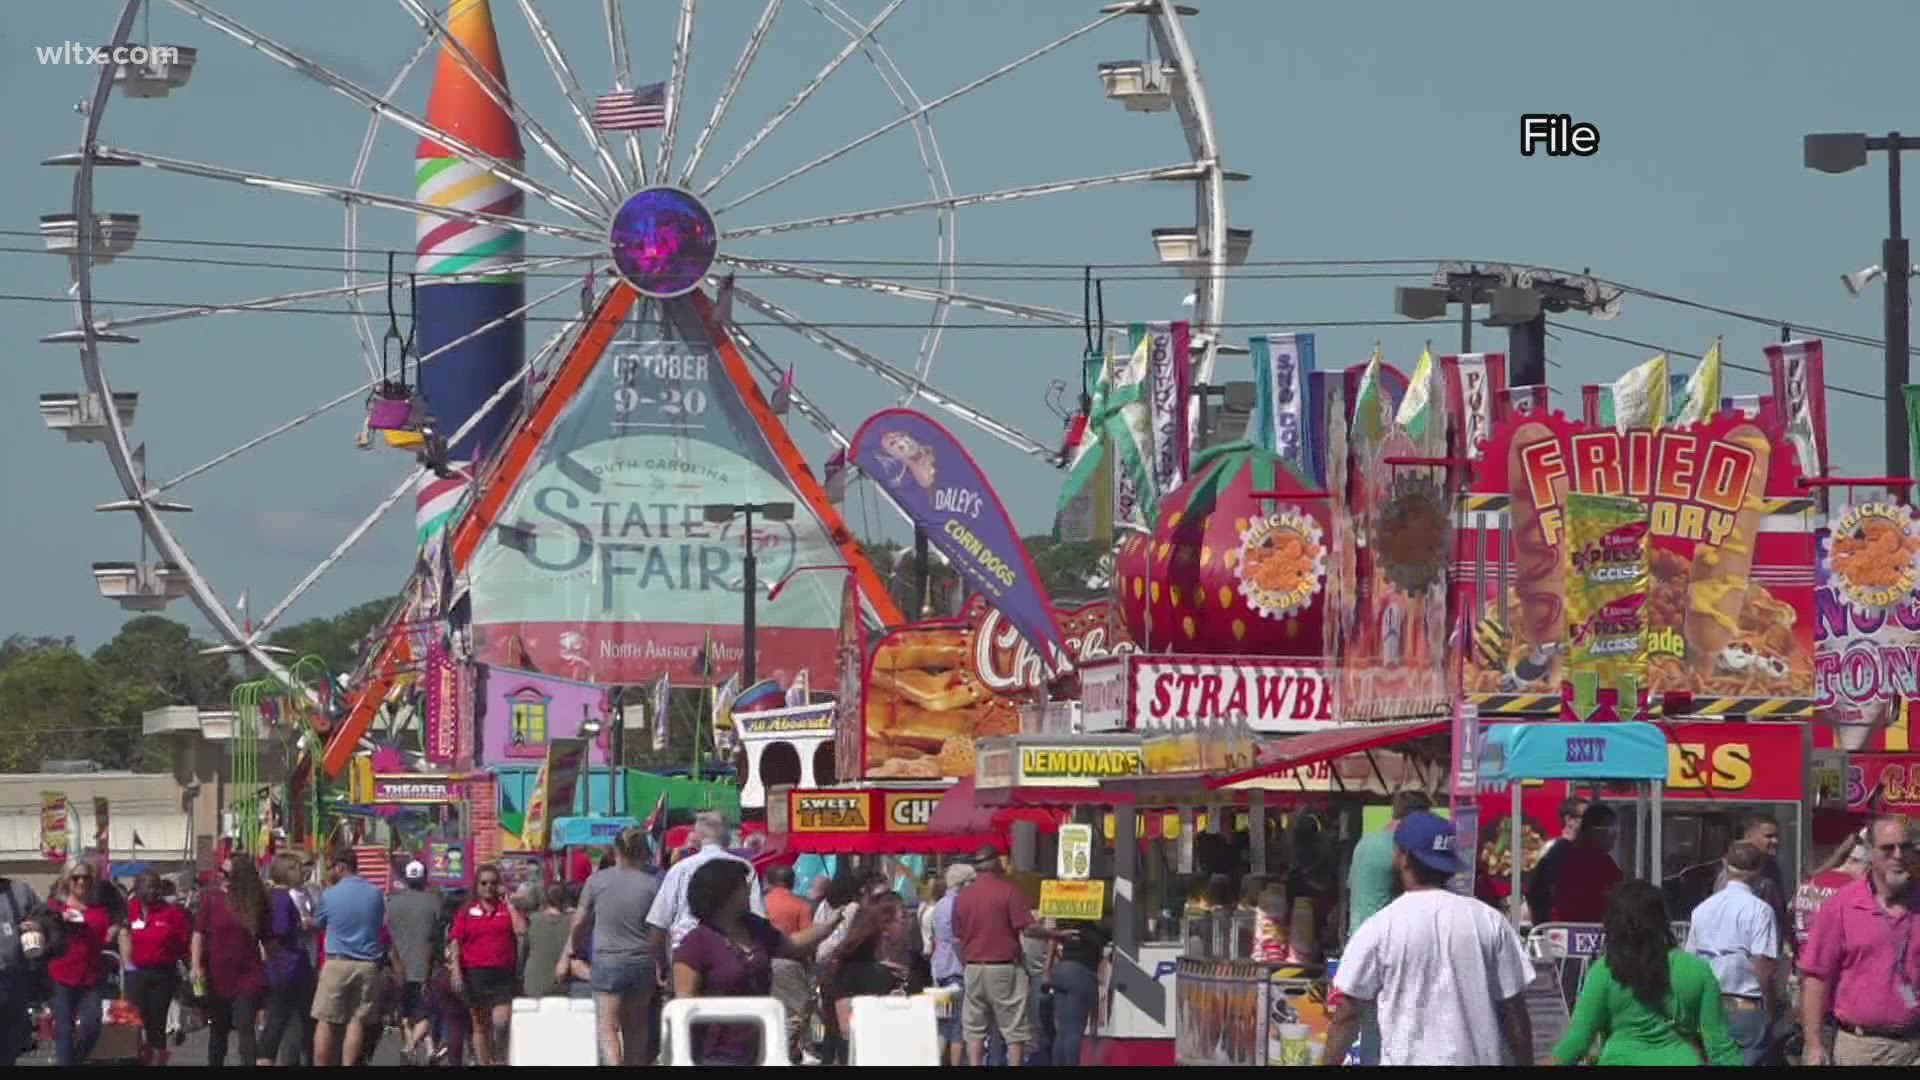 Discount tickets to SC State Fair go on sale Wednesday, Sept. 8